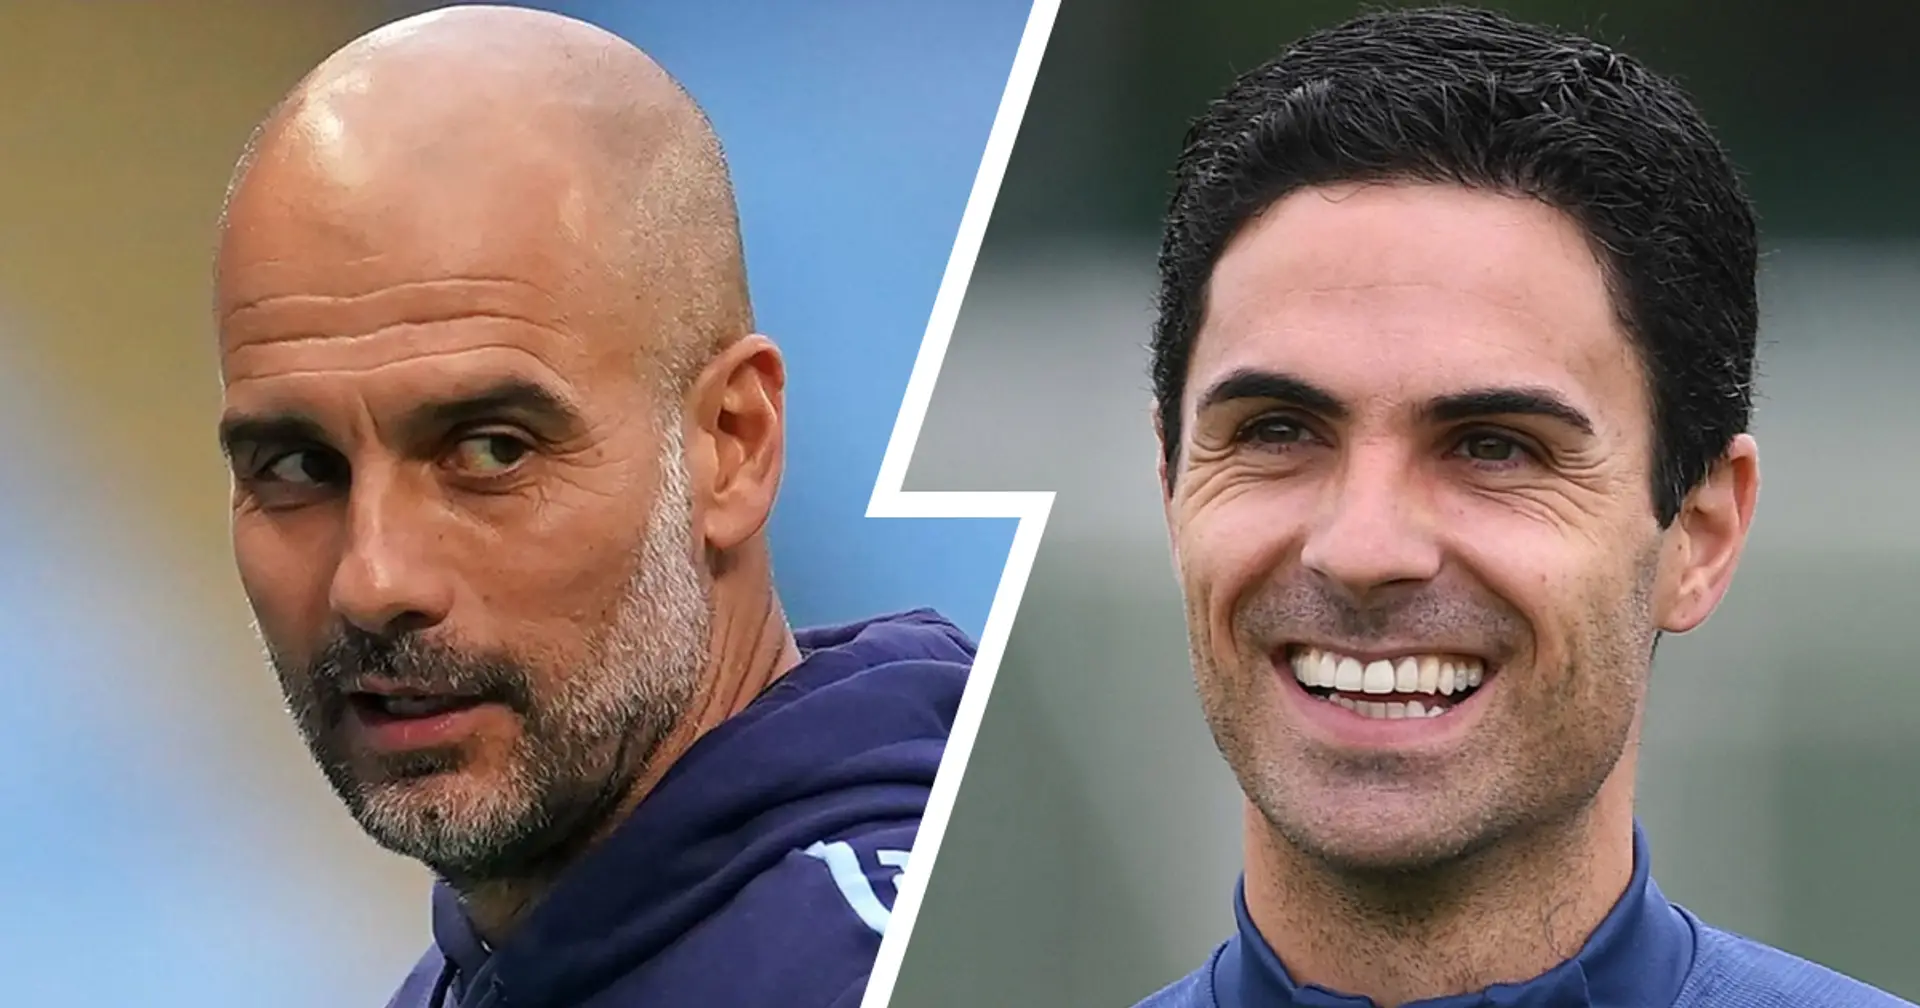 'We should clarify who is the master and who is the apprentice': Pep Guardiola pays huge compliment to Mikel Arteta 